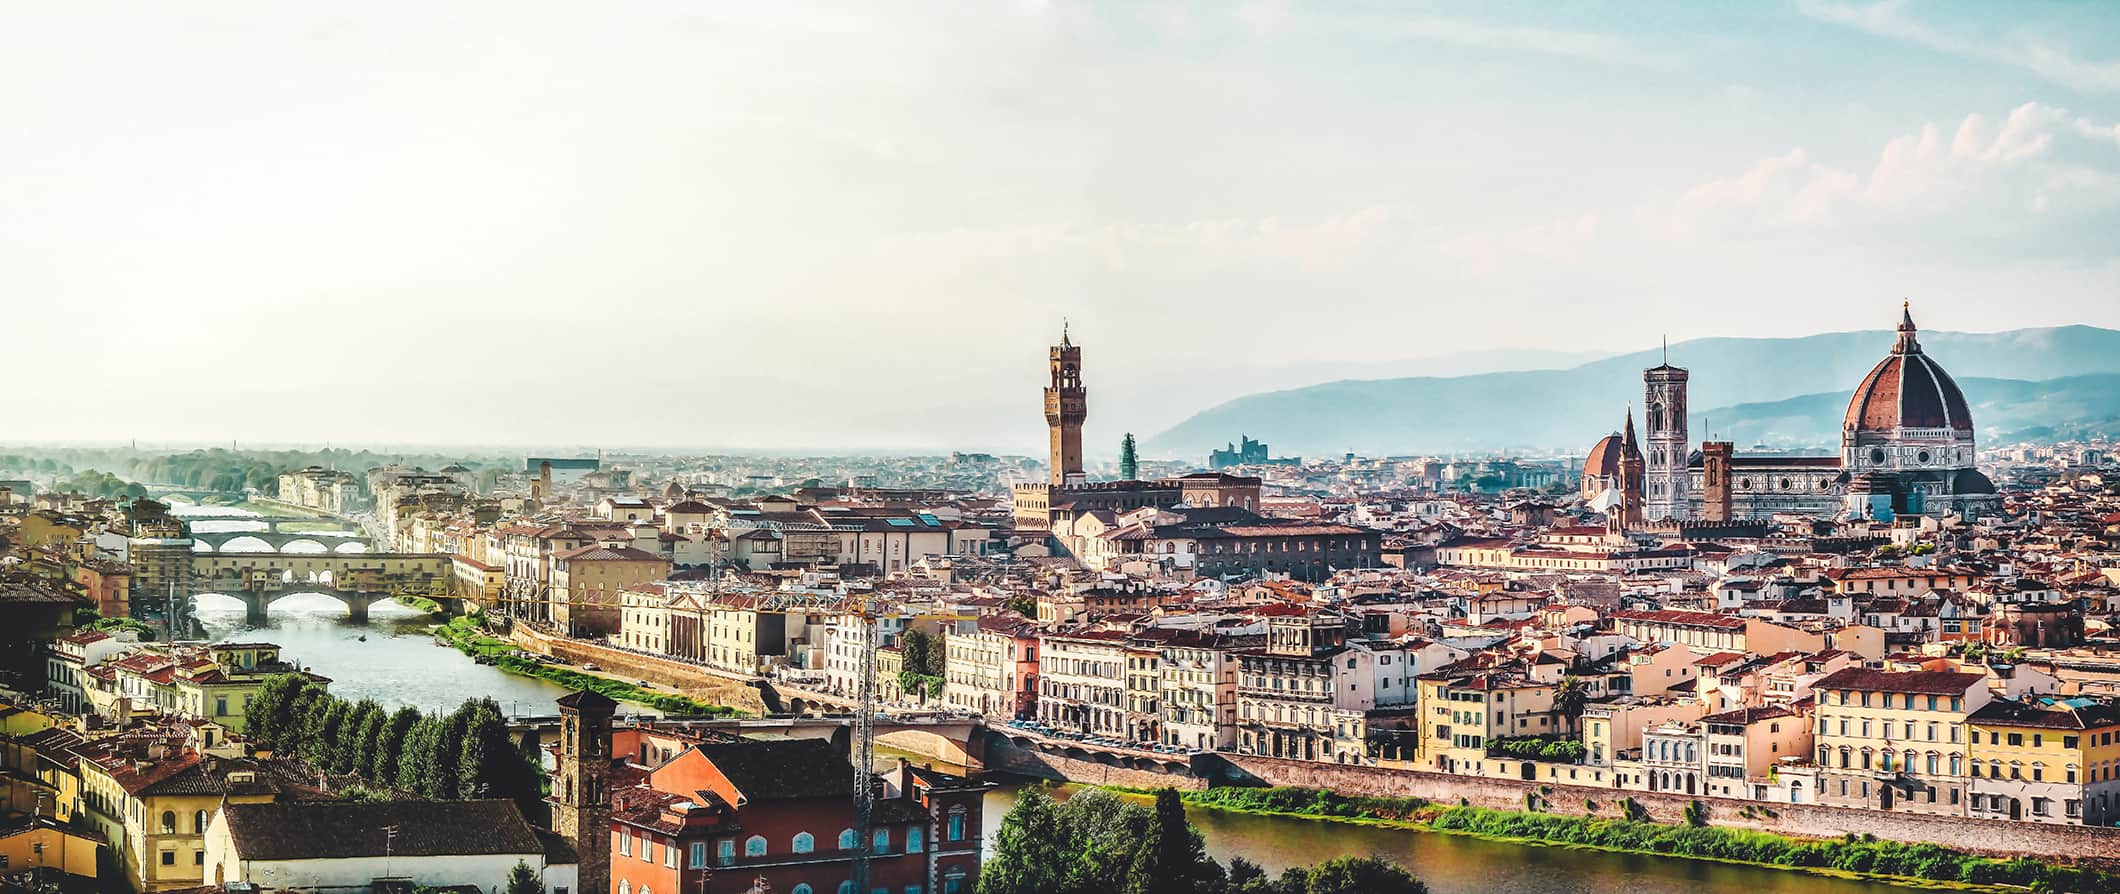 A beautiful view overlooking the city of Florence, Italy, with its stunning red roofs and mountains in the background